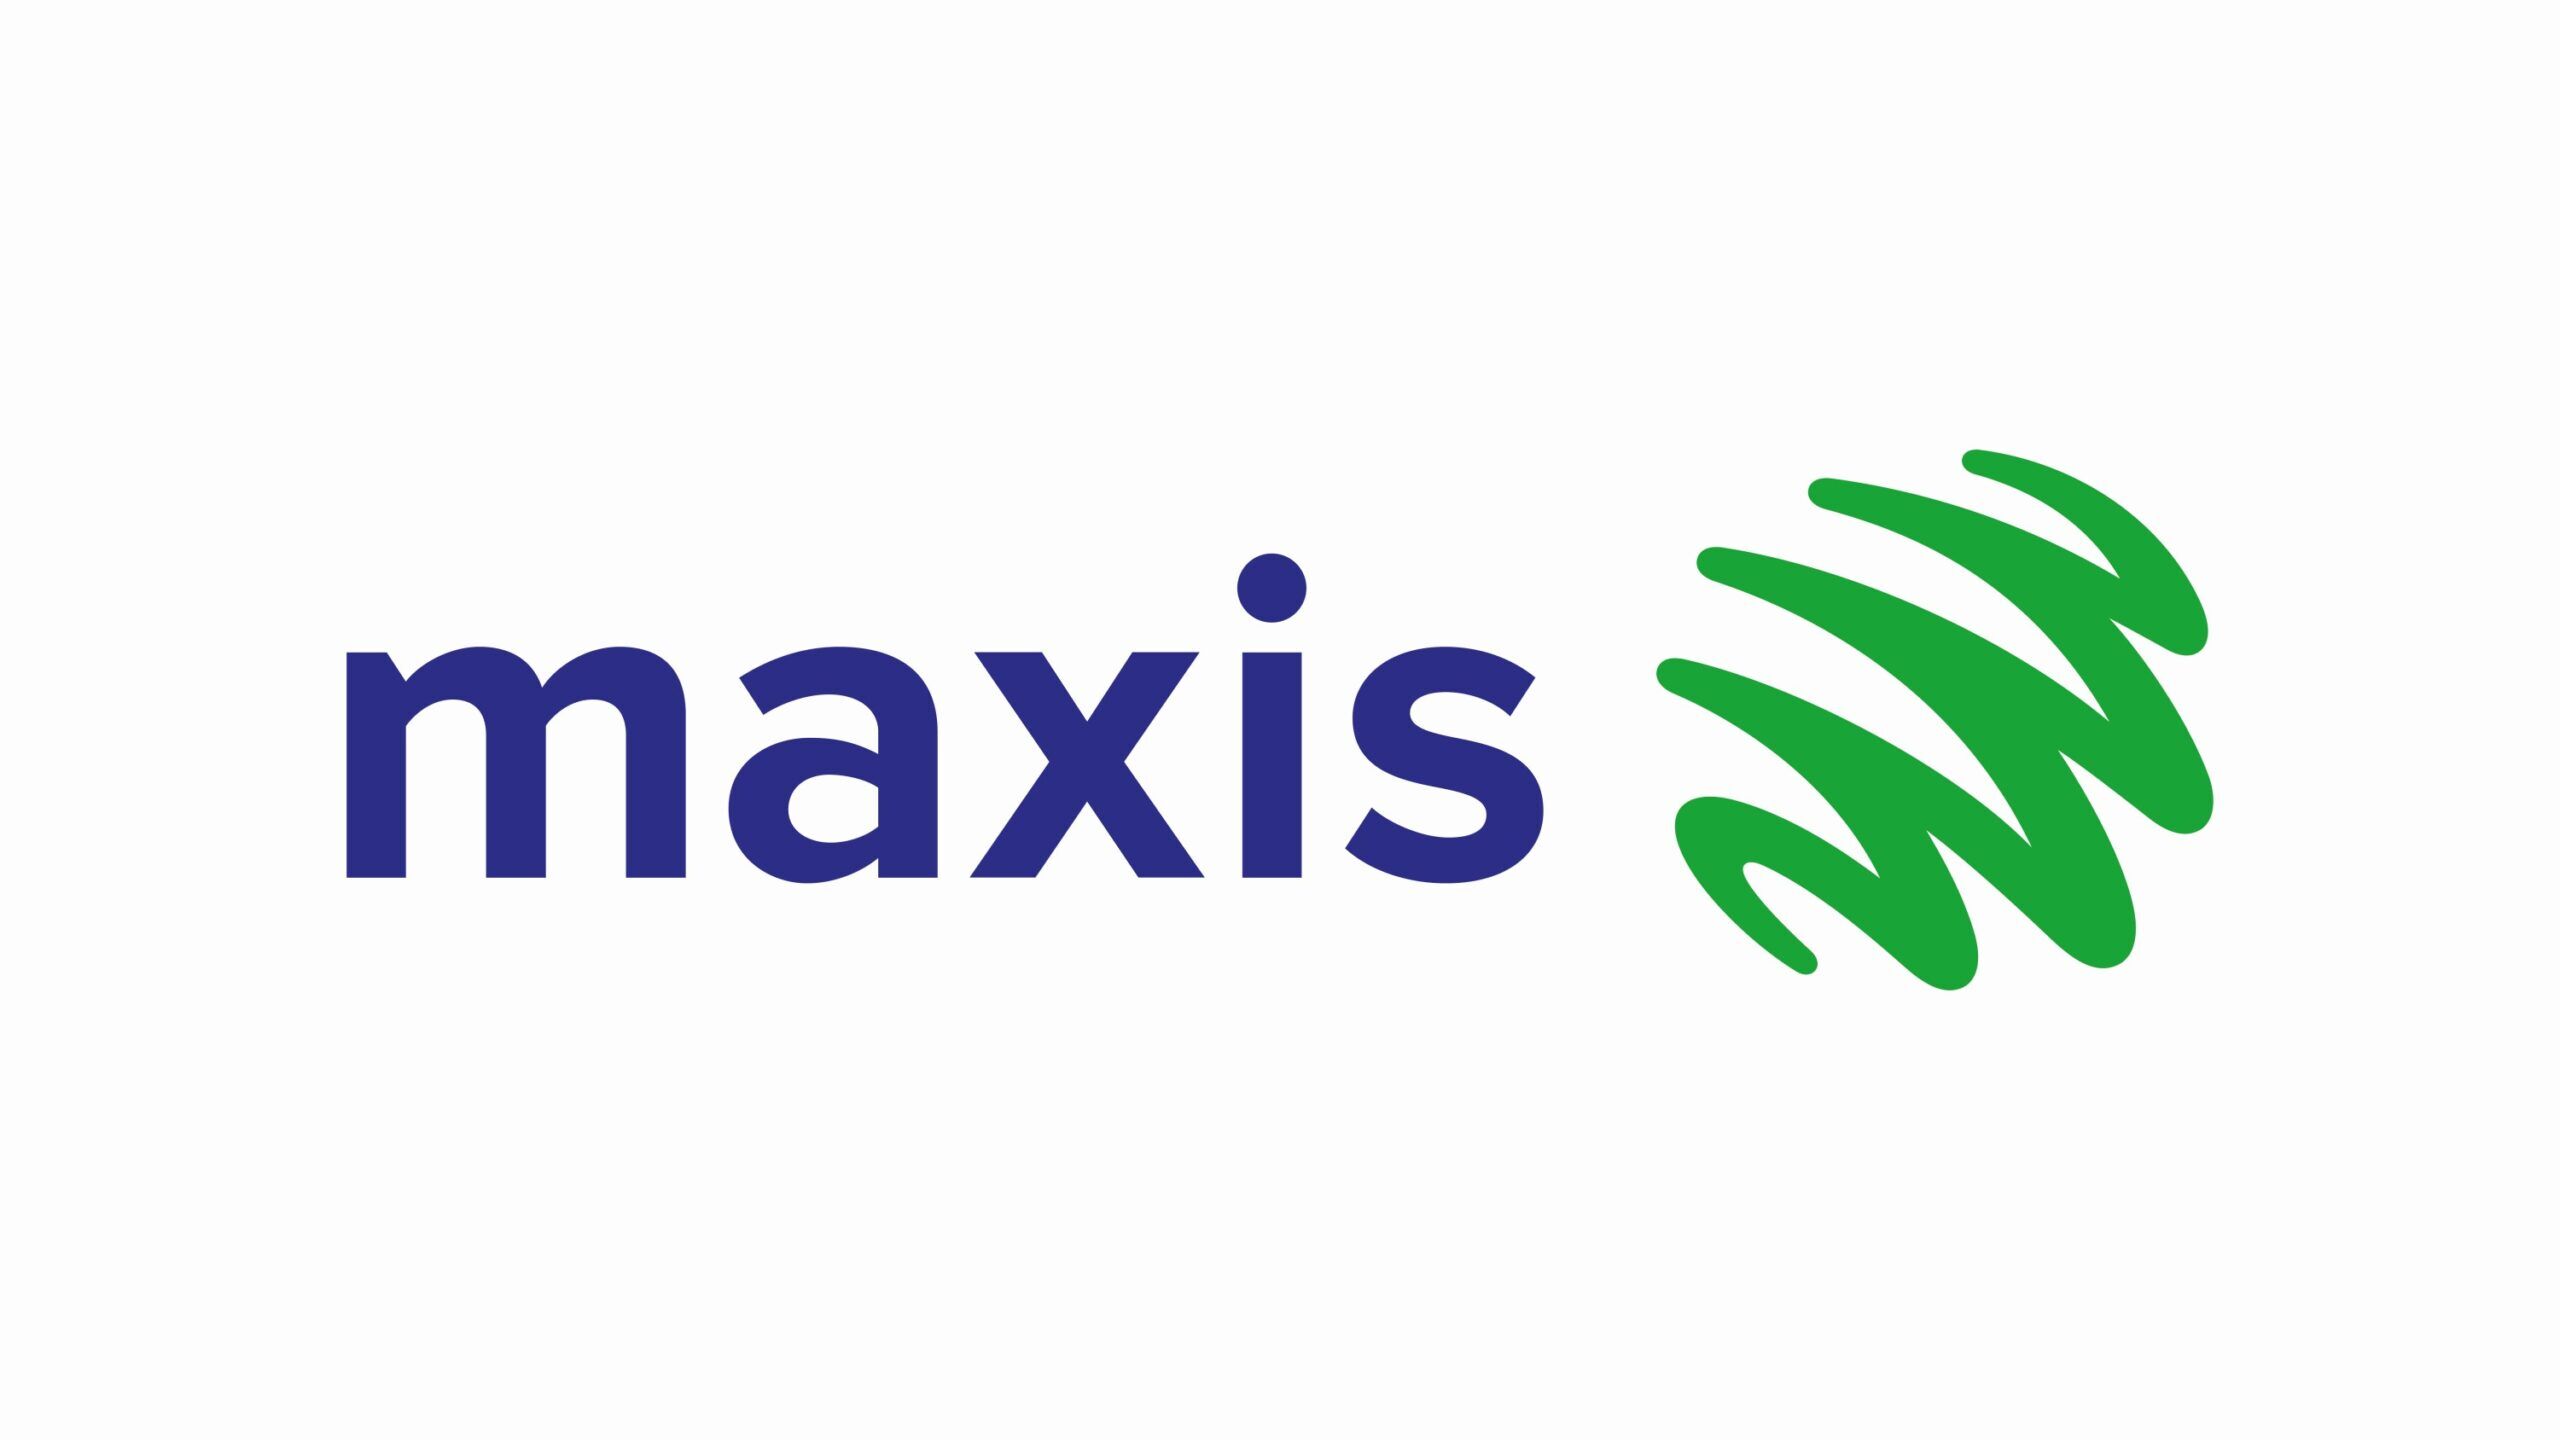 Maxis Expands 5G Roaming Service to 29 Countries